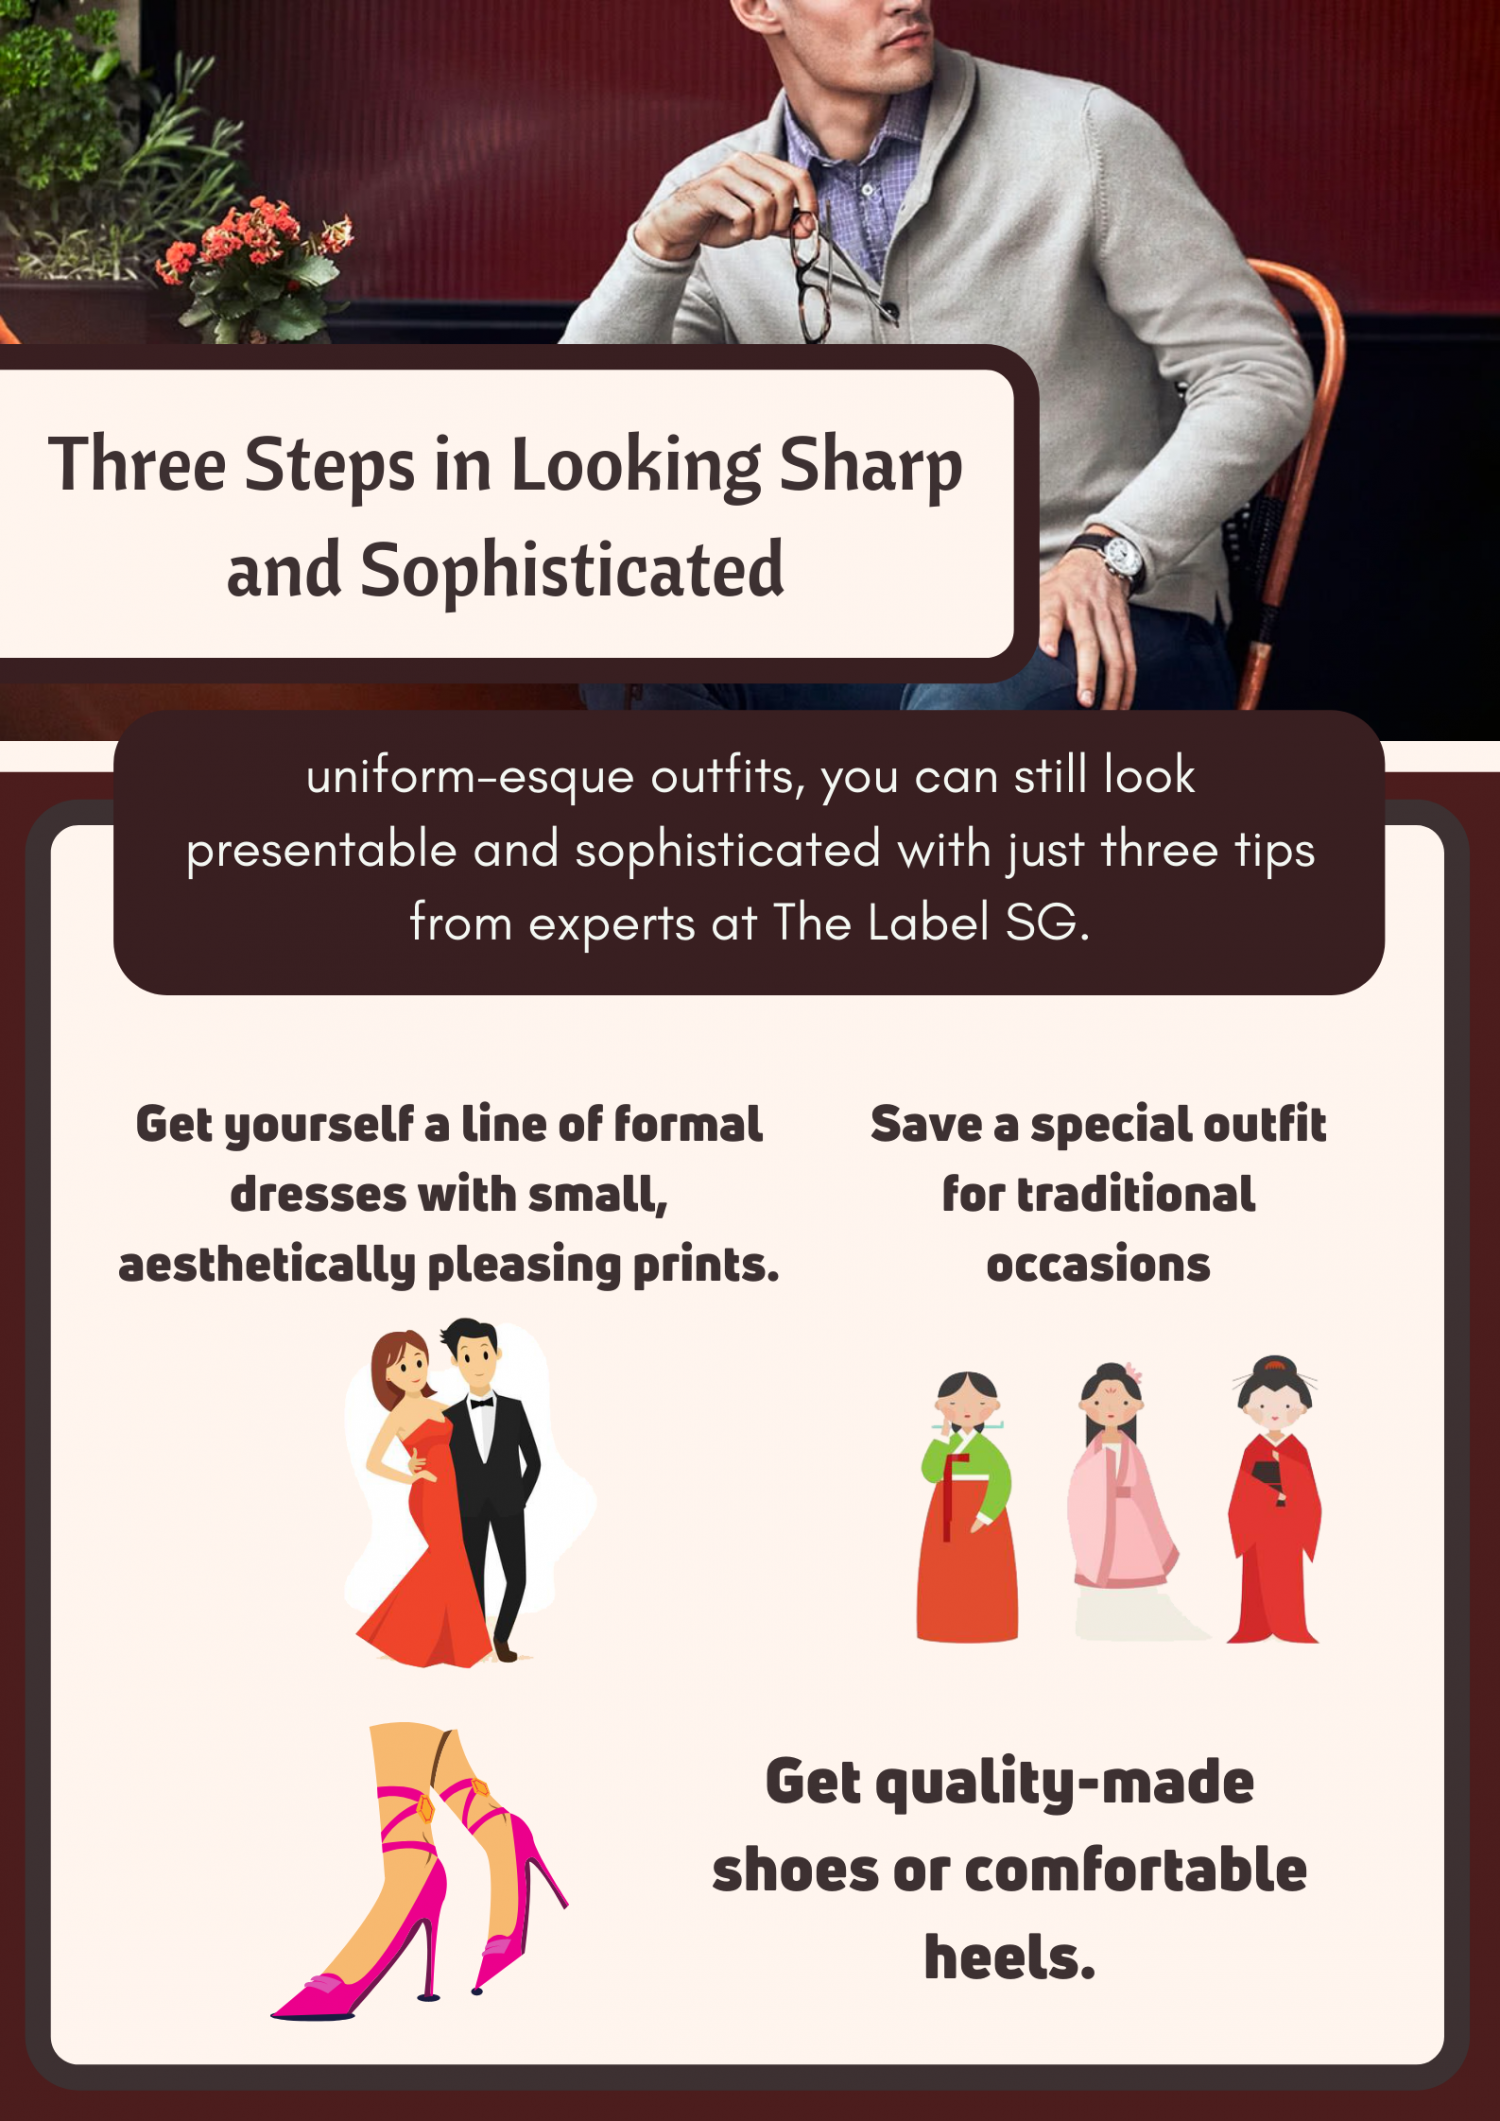 Three Steps in Looking Sharp and Sophisticated Infographic